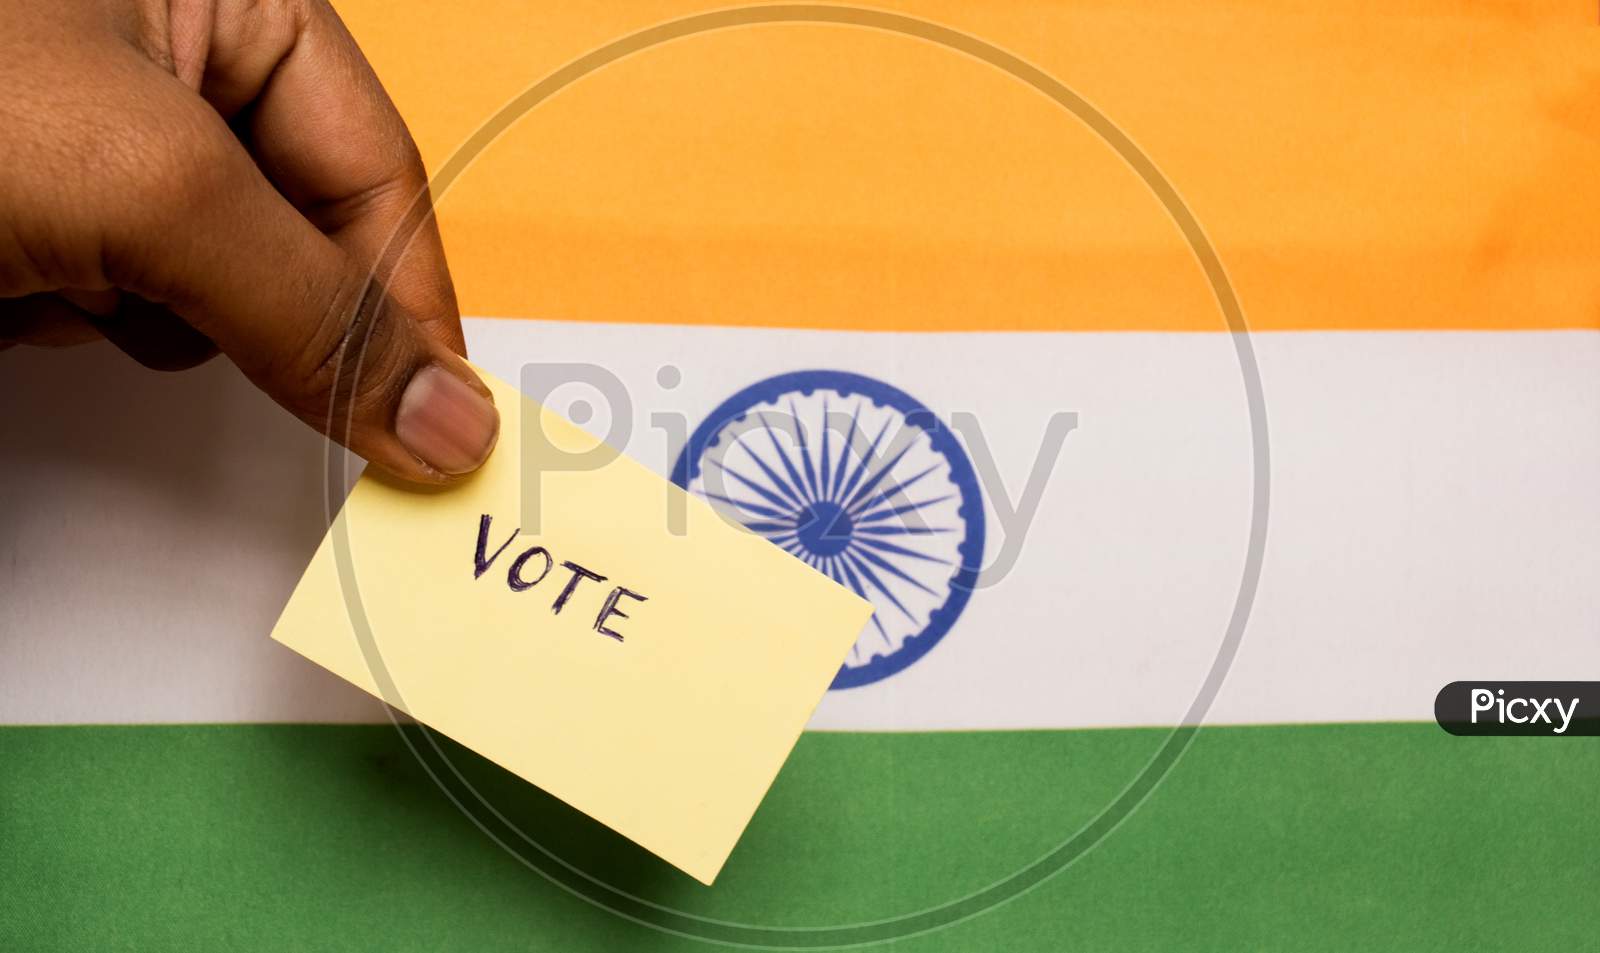 Voting Concept - Person Holding Hand Written Voting Sticker On India Flag.